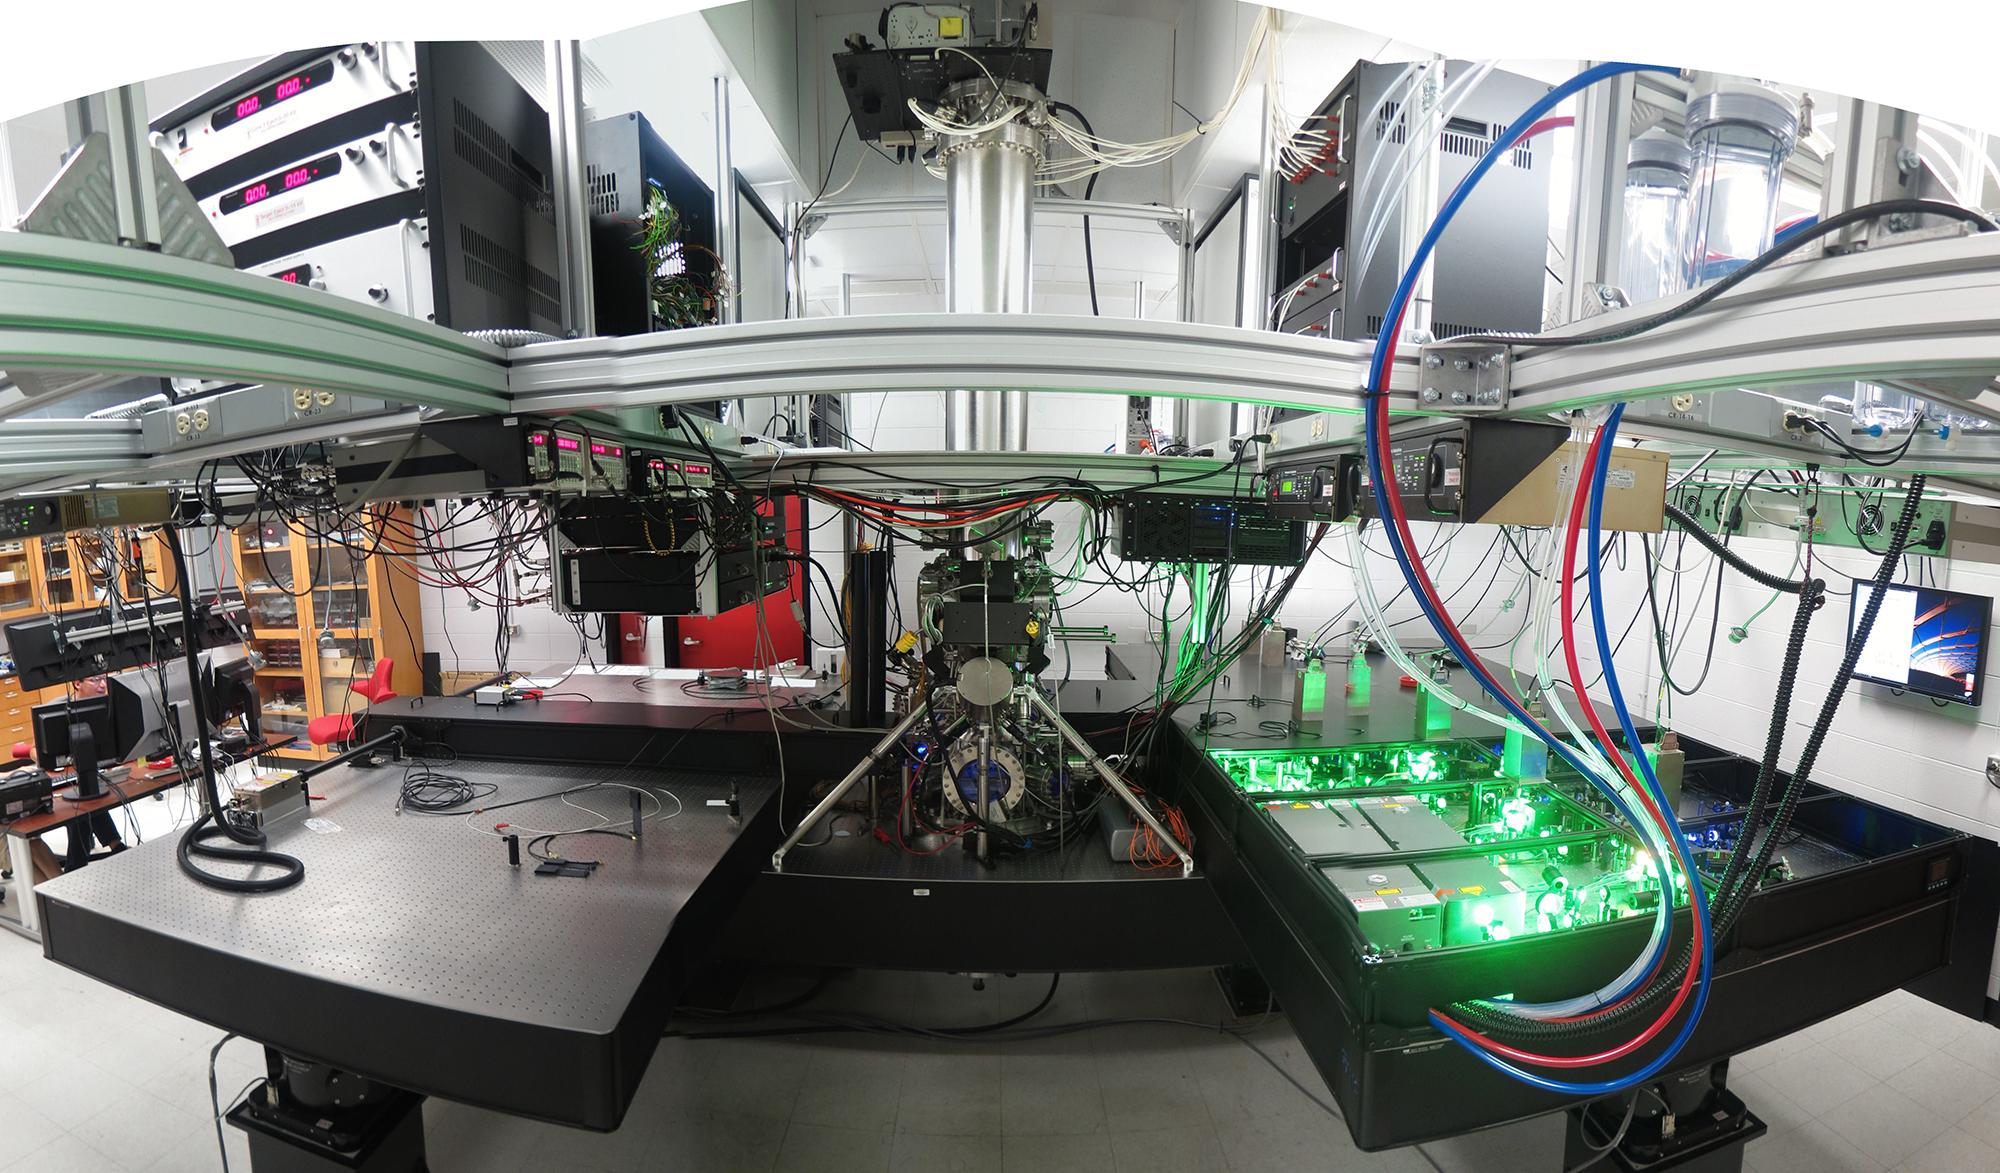 The CHicago Instrument for Laser Ionization (CHILI) was used to count strontium isotopes in rocks from Nuvvuagittuq, Canada. (Thomas Stephan / University of Chicago)